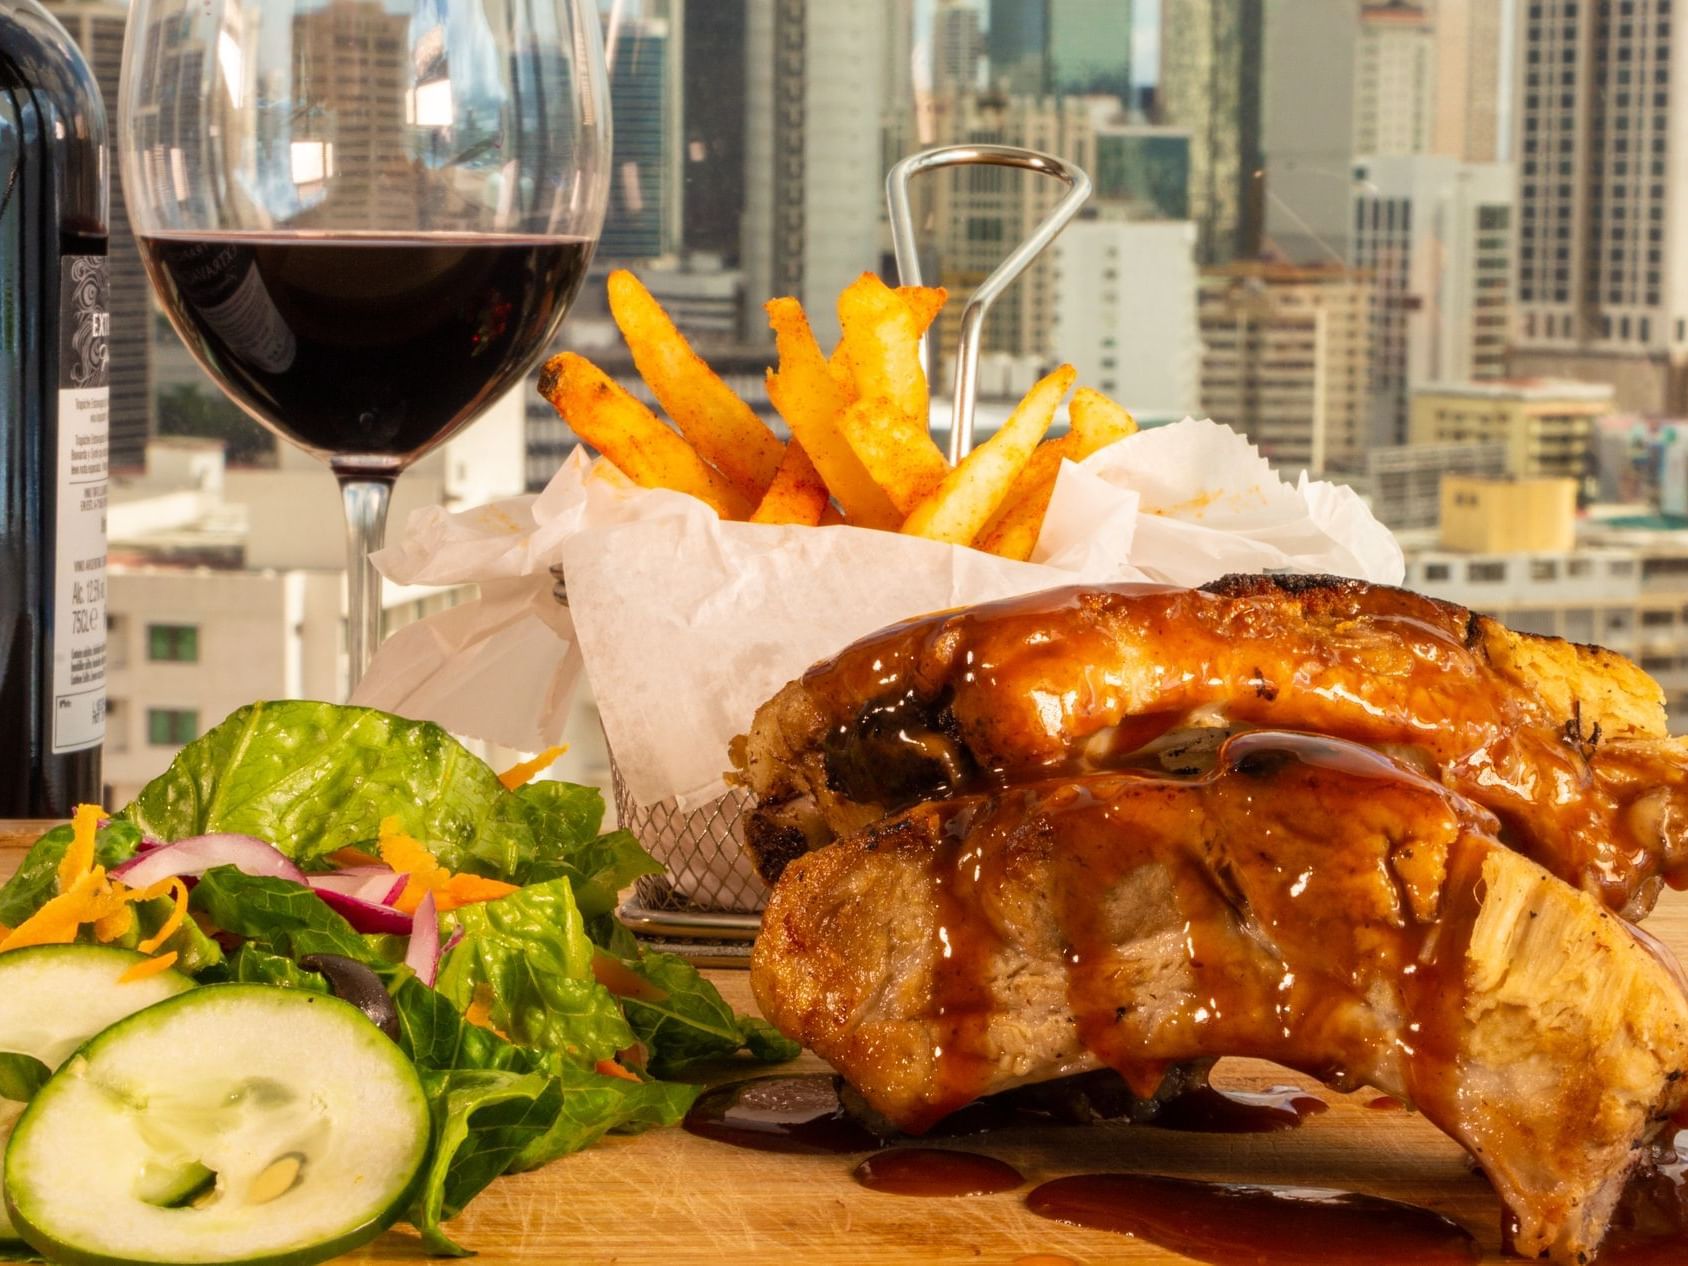 A dish of ribs served with french fries, a salad and a glass of red wine 